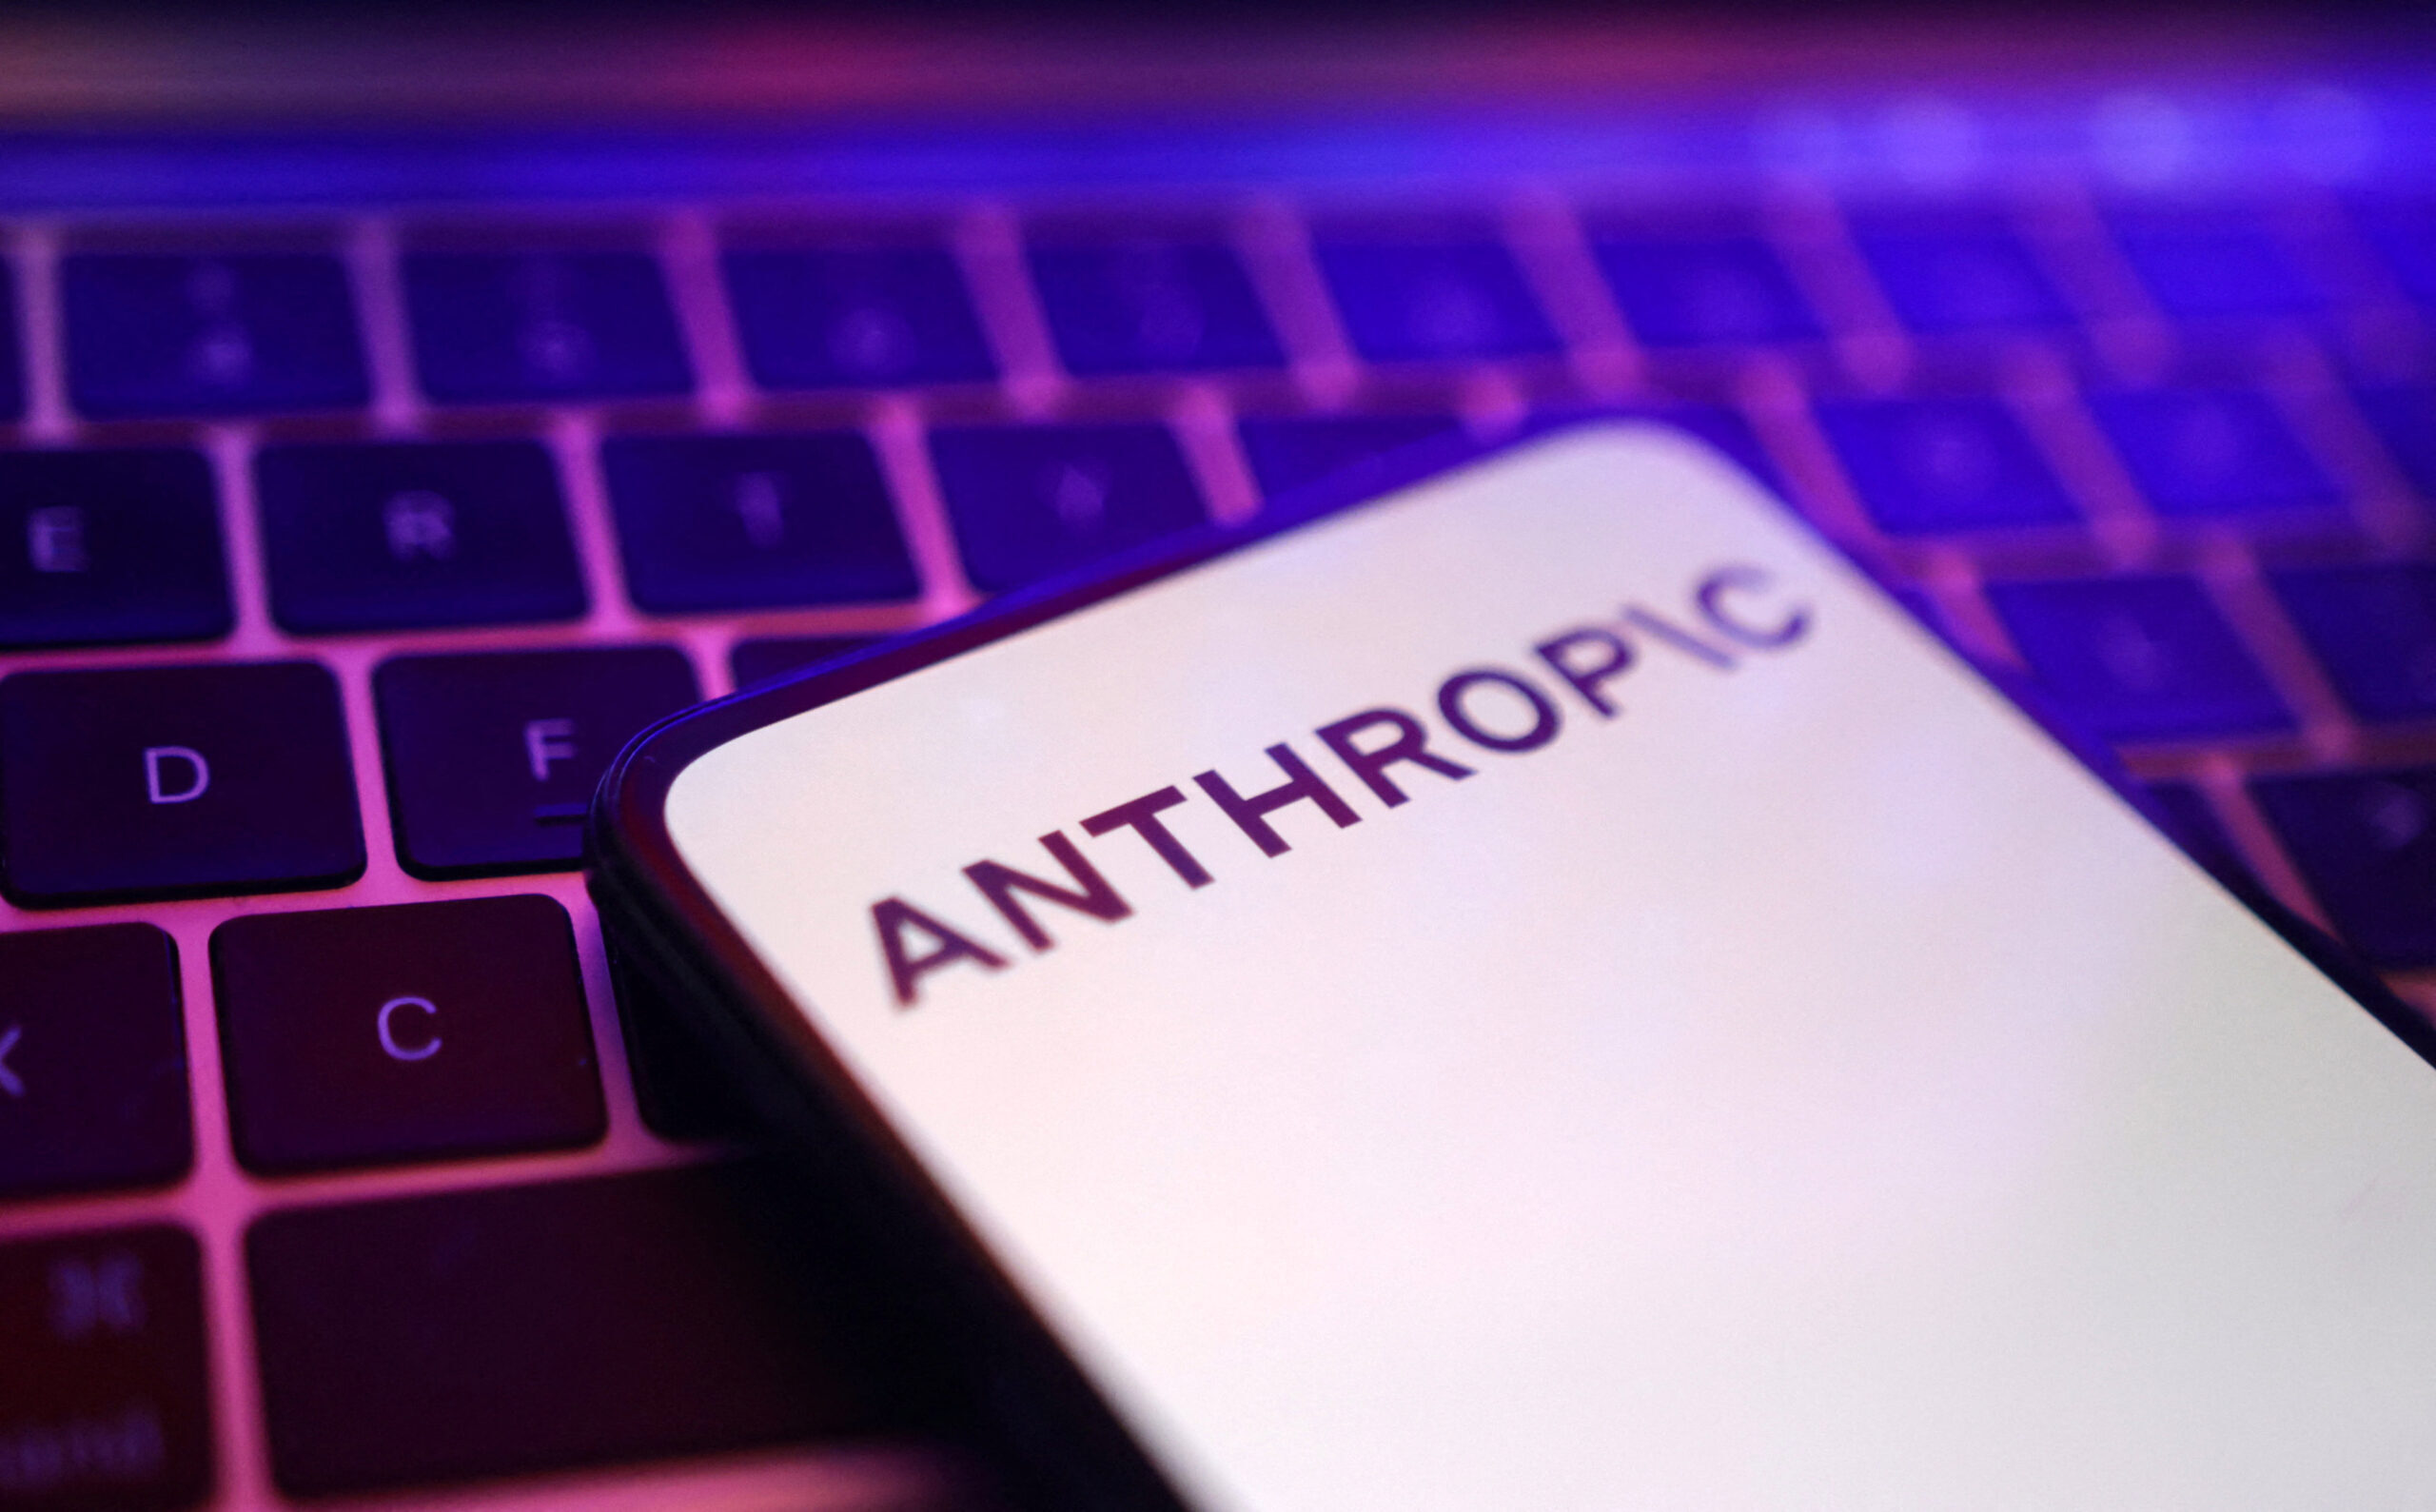 ChatGPT rival Anthropic upgrades chatbots 3 months after Amazon's $3B investment